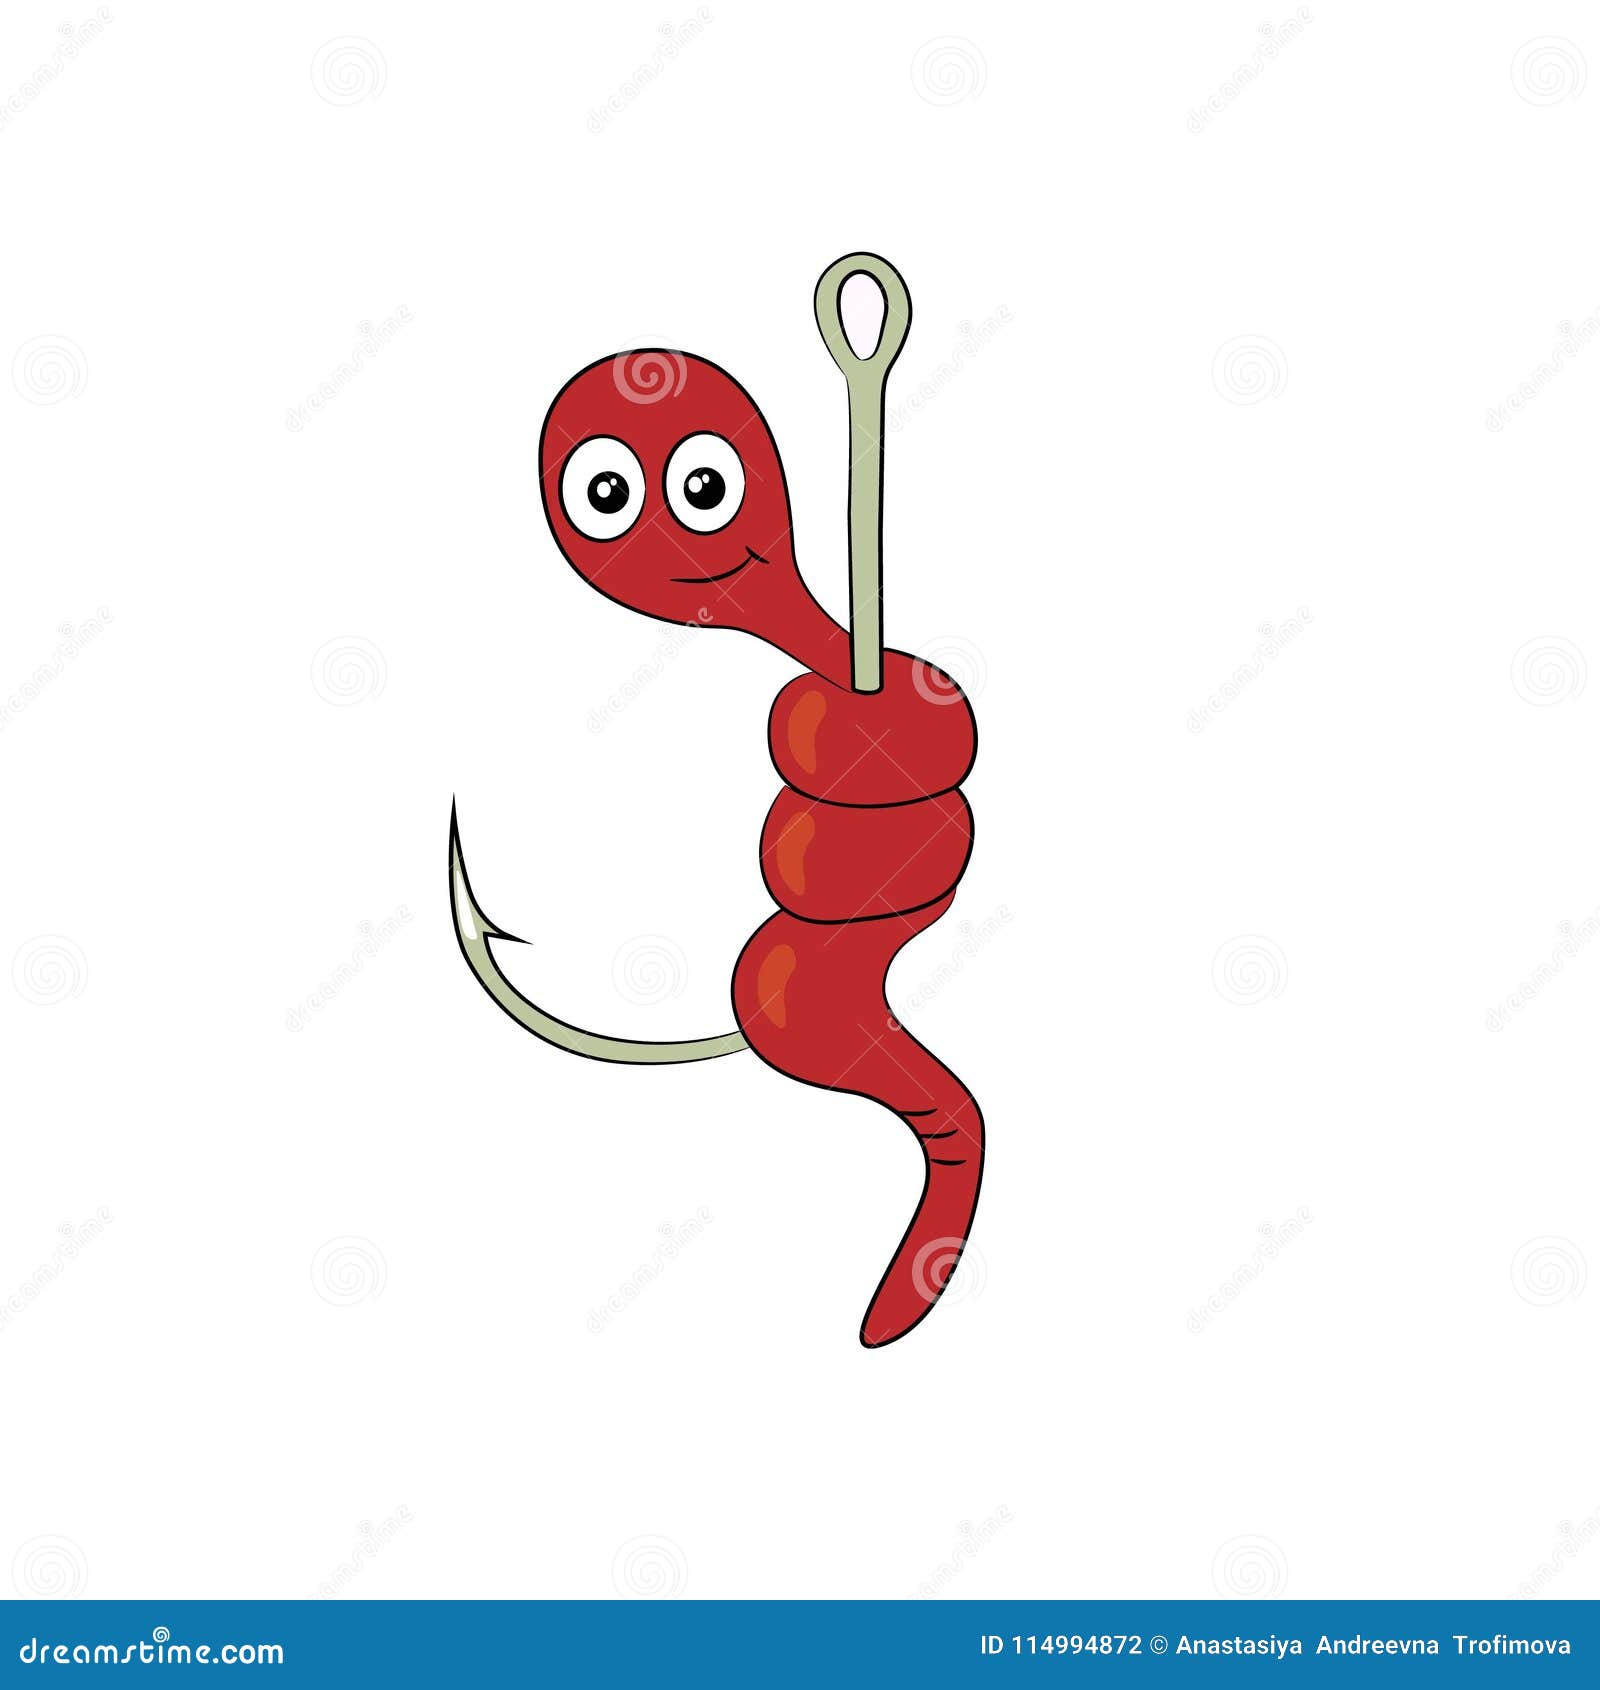 Worm on a hook stock vector. Illustration of worm, isolated - 114994872